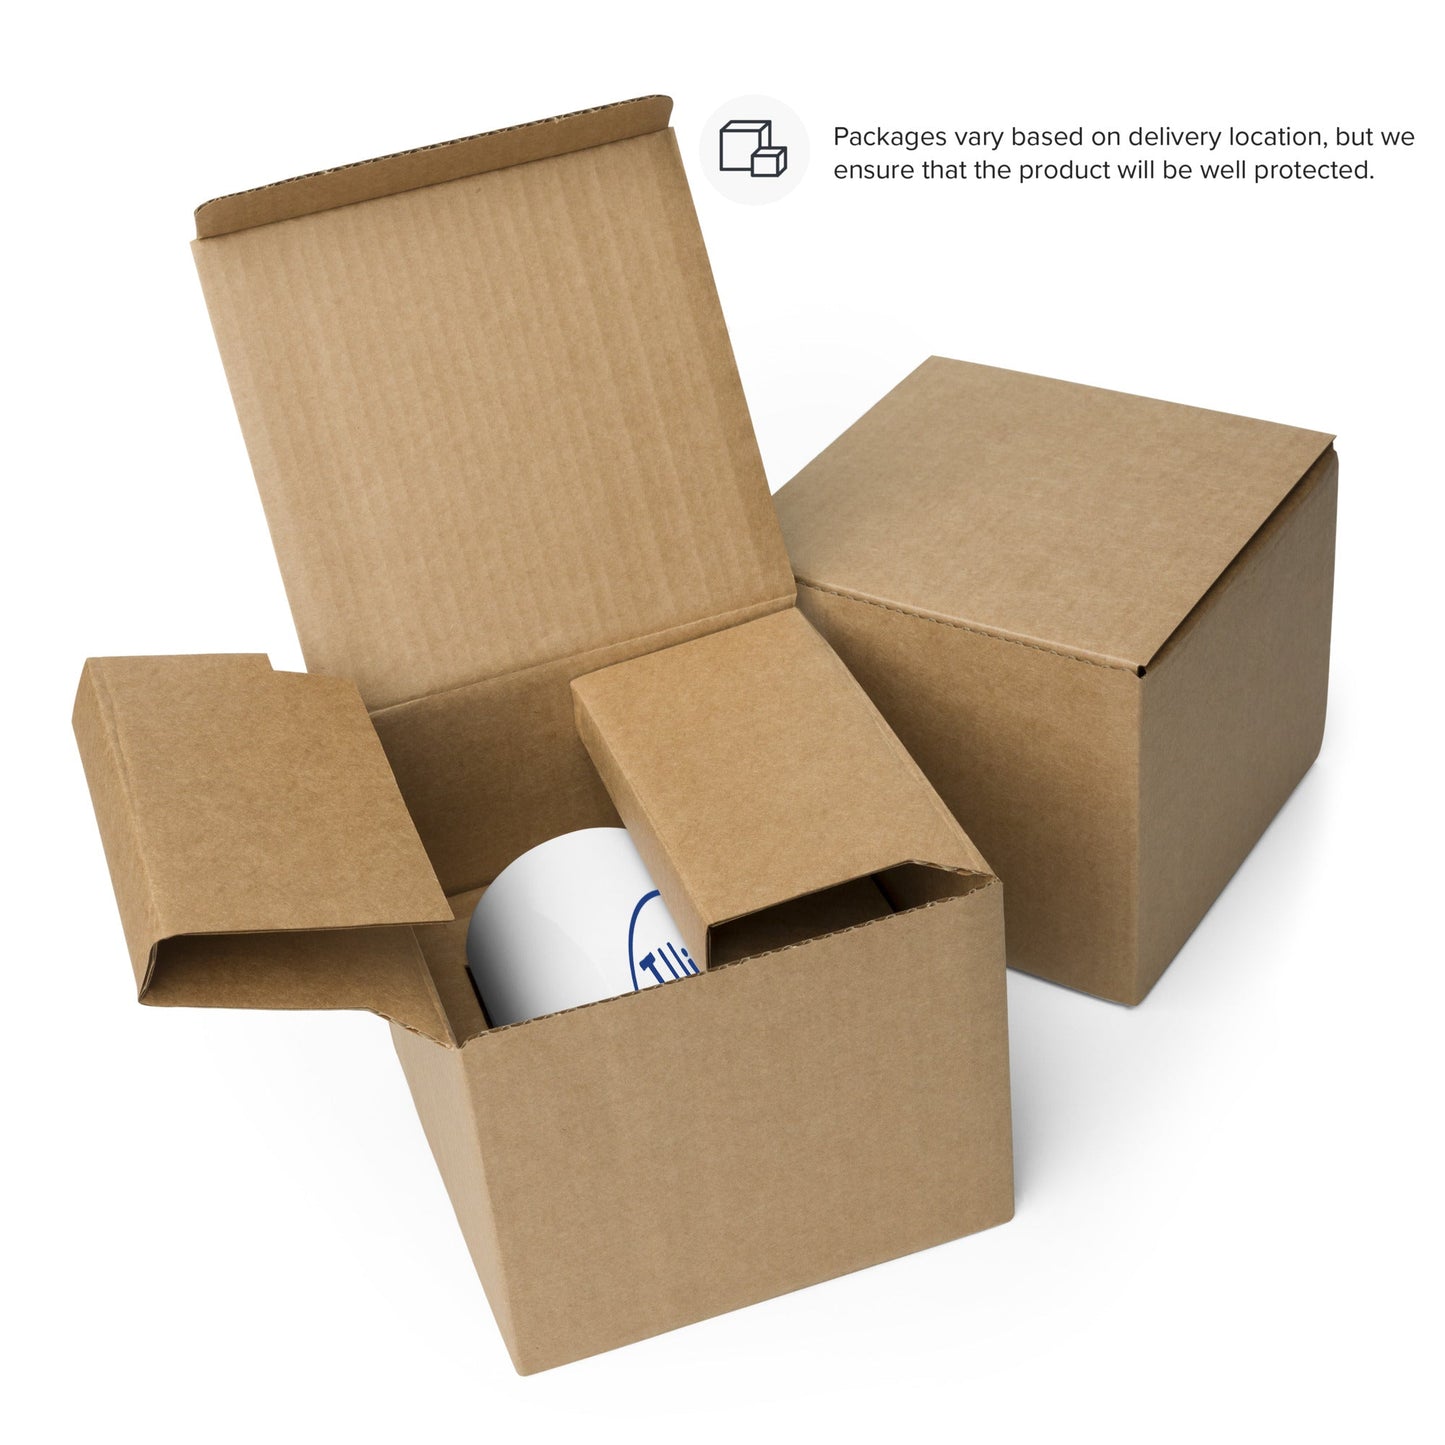 Two opened cardboard boxes, one containing protective packaging material and a White Glossy Mug Navy Blue THiNK LiKE A DOG® Logo designed for dog lovers.